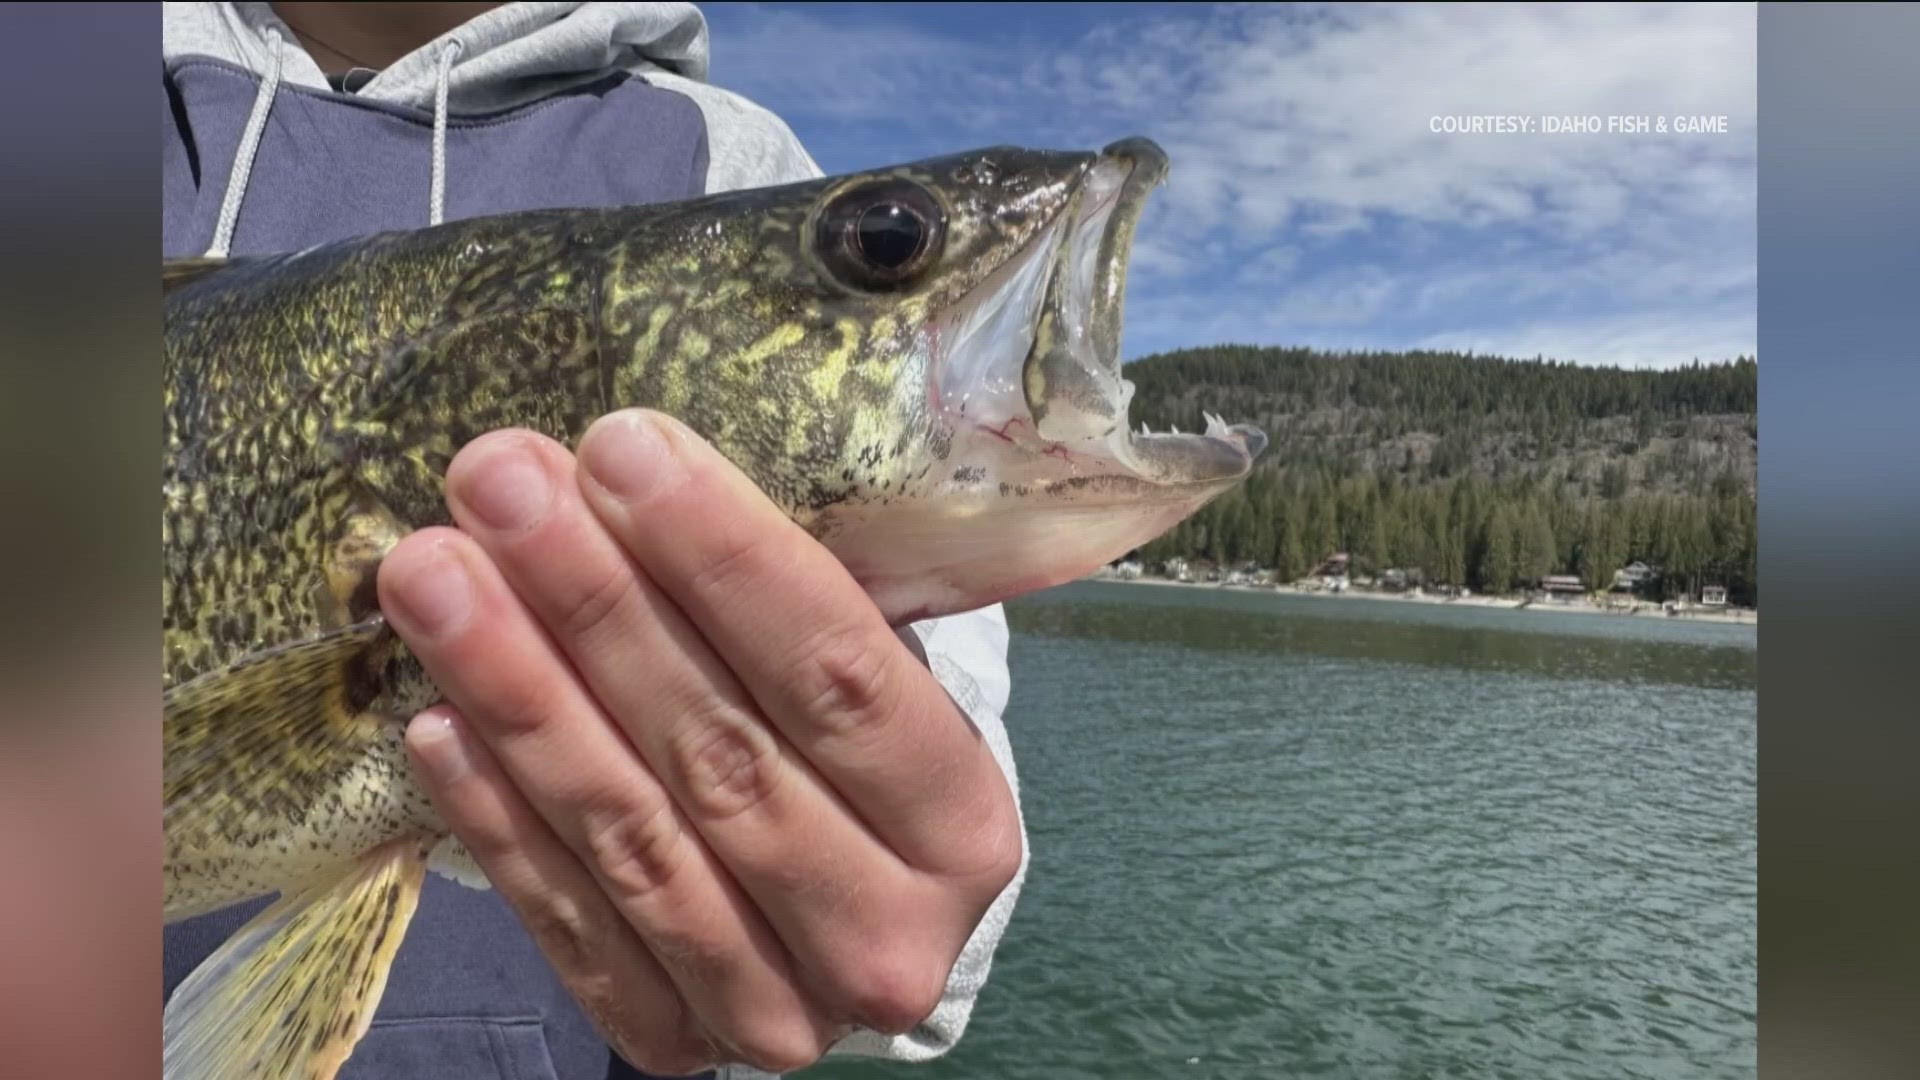 The number of walleye increases every year. Idaho Fish and Game is asking anglers not to release them back if caught.